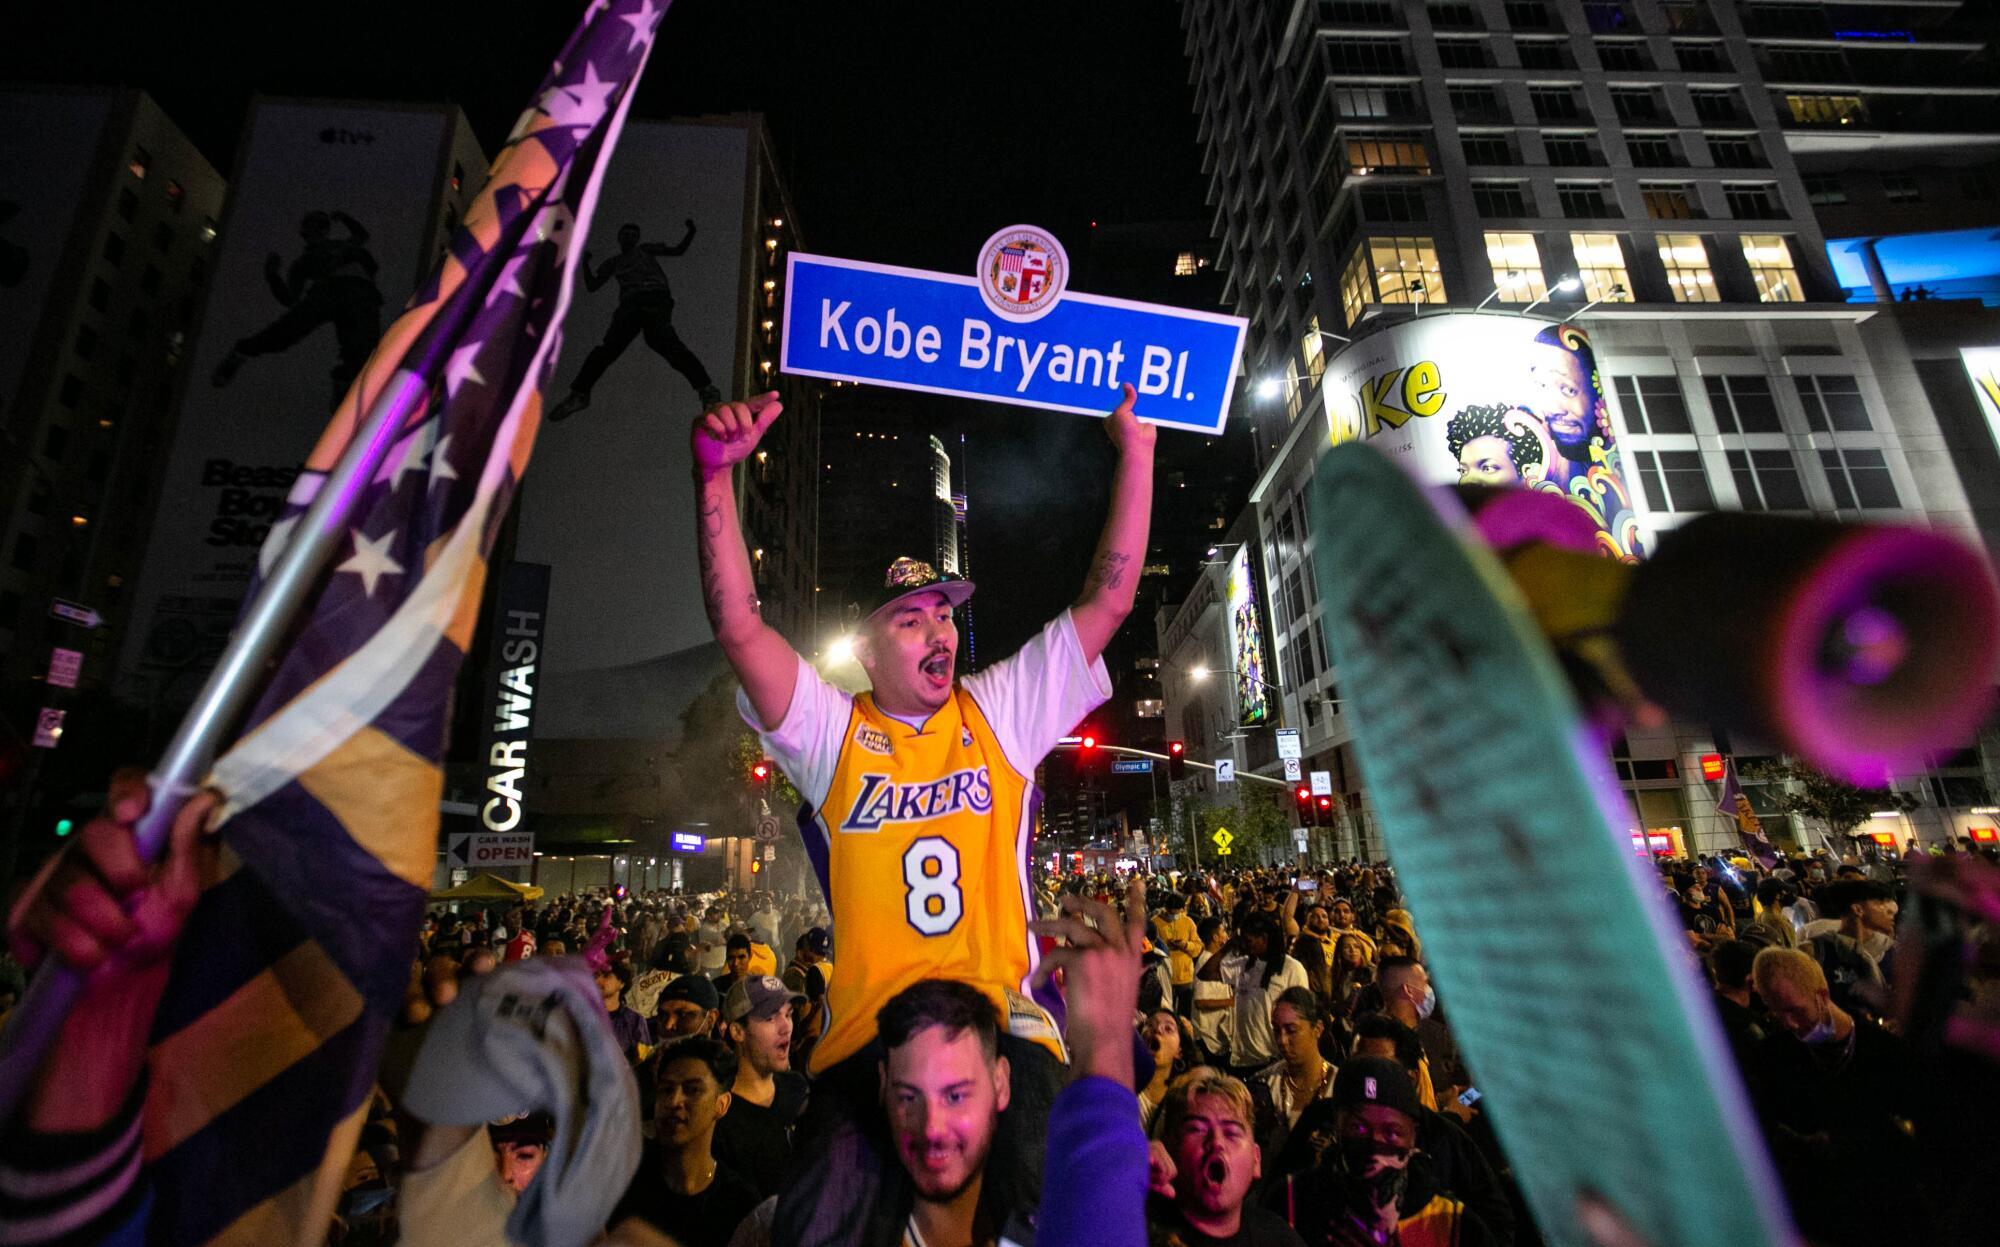 A man holds up a Kobe Bryant Boulevard sign as fans celebrate after the Lakers’ win over the Miami Heat in the NBA Finals.